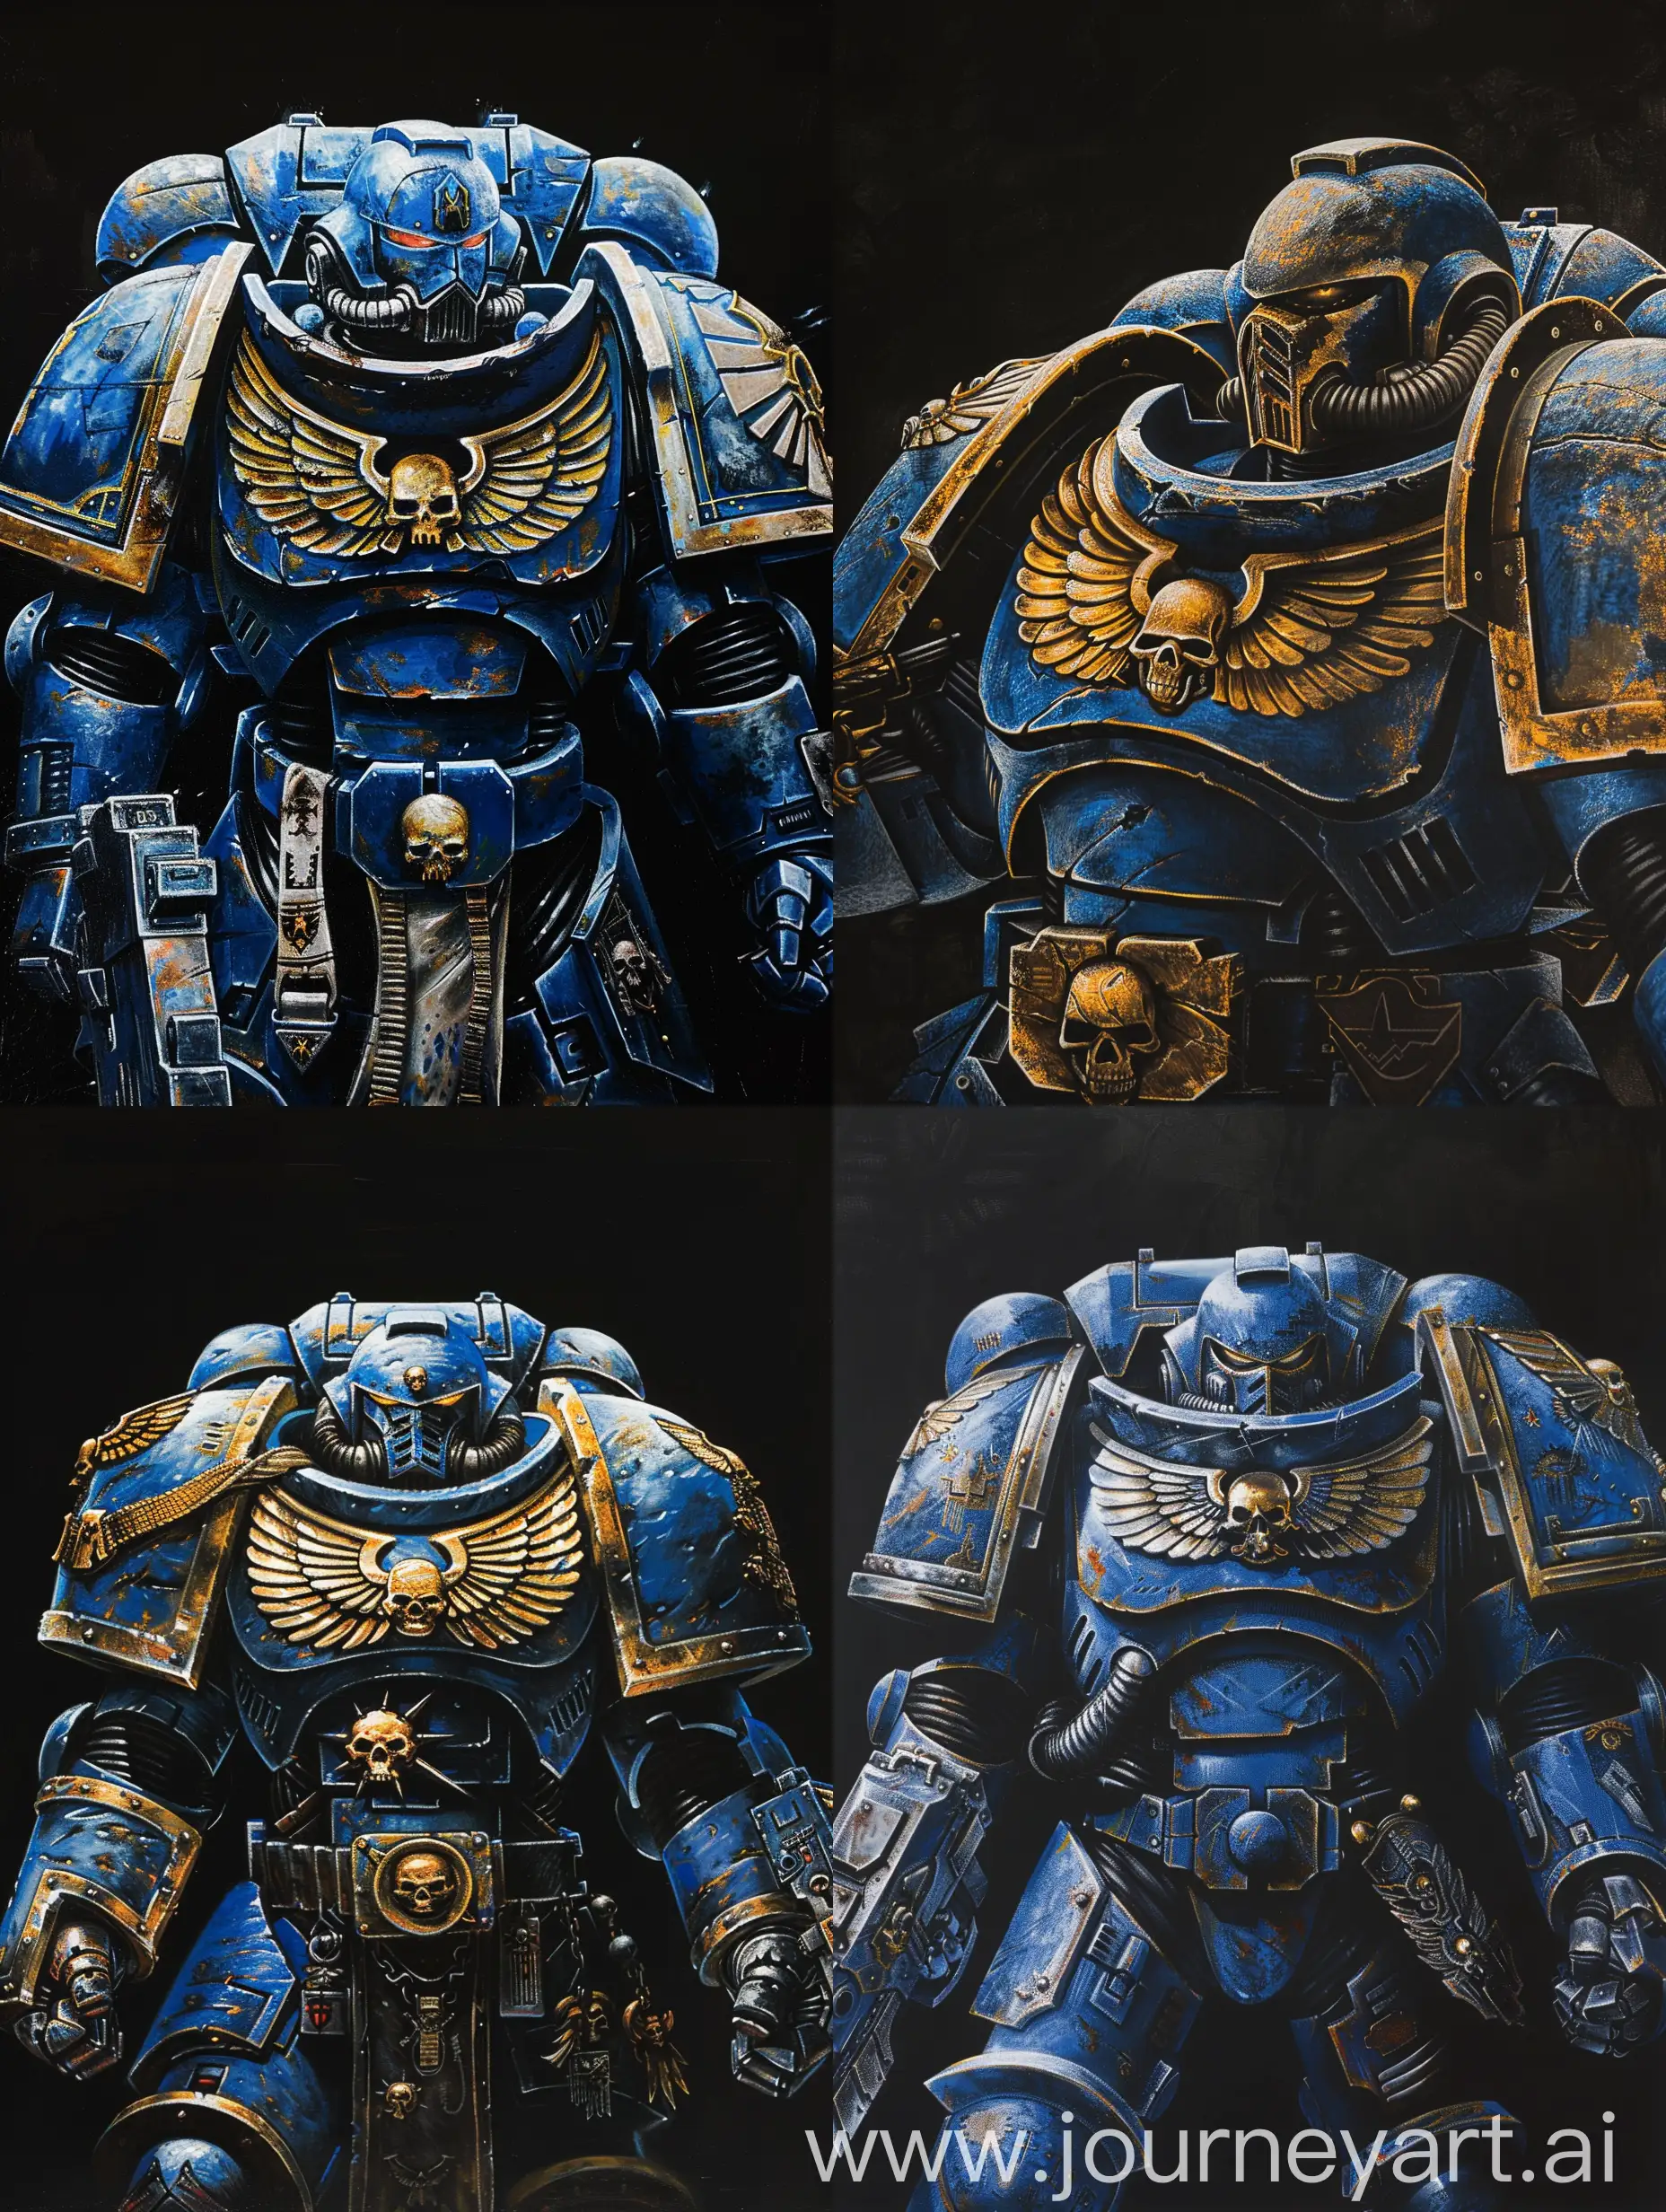 A painting of the Ultramarines from the Warhammer 40k universe. The background is cool black.